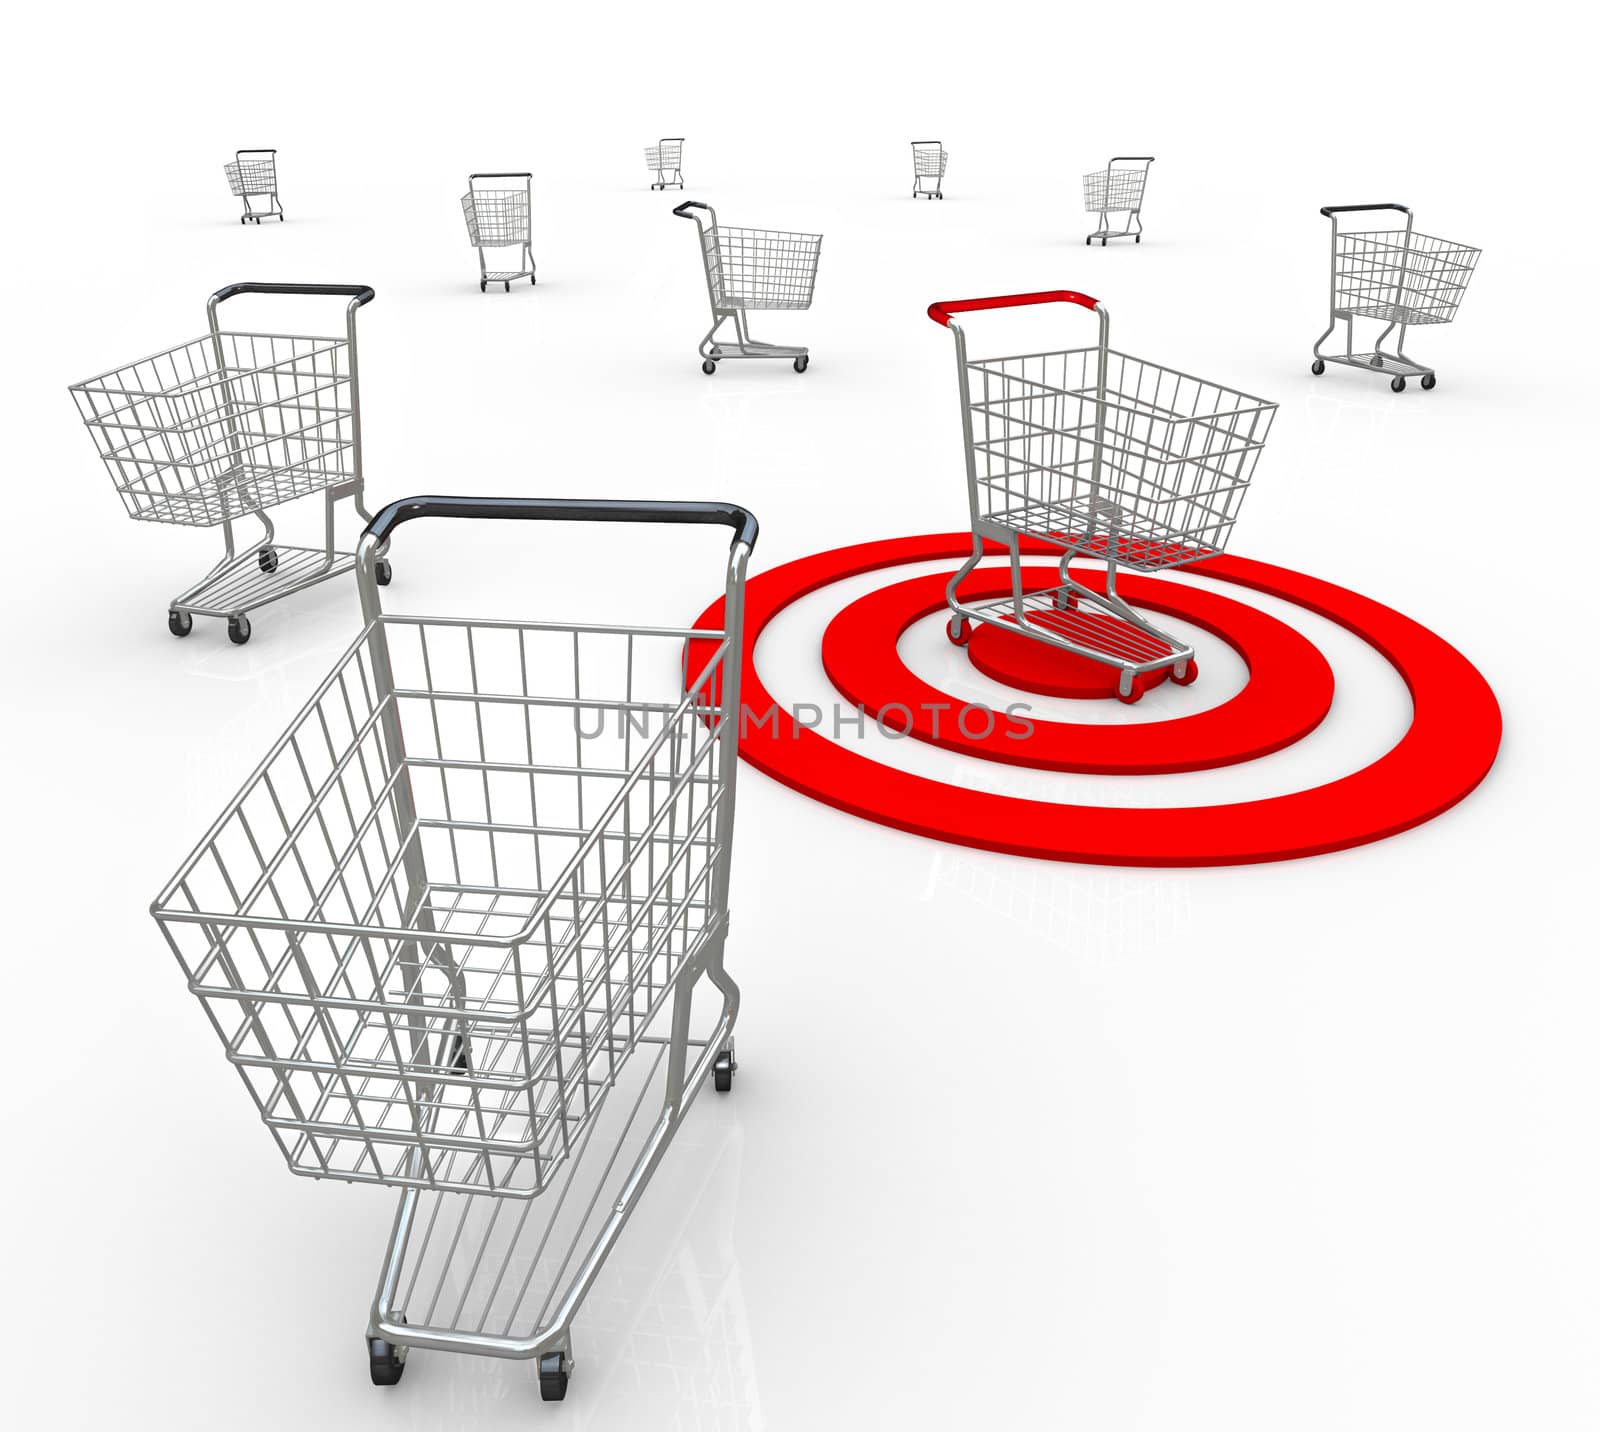 A red bullseye targets one unique customer out of several consumers so a company or business can identify what the shopper's needs and interests are so they may sell to that person